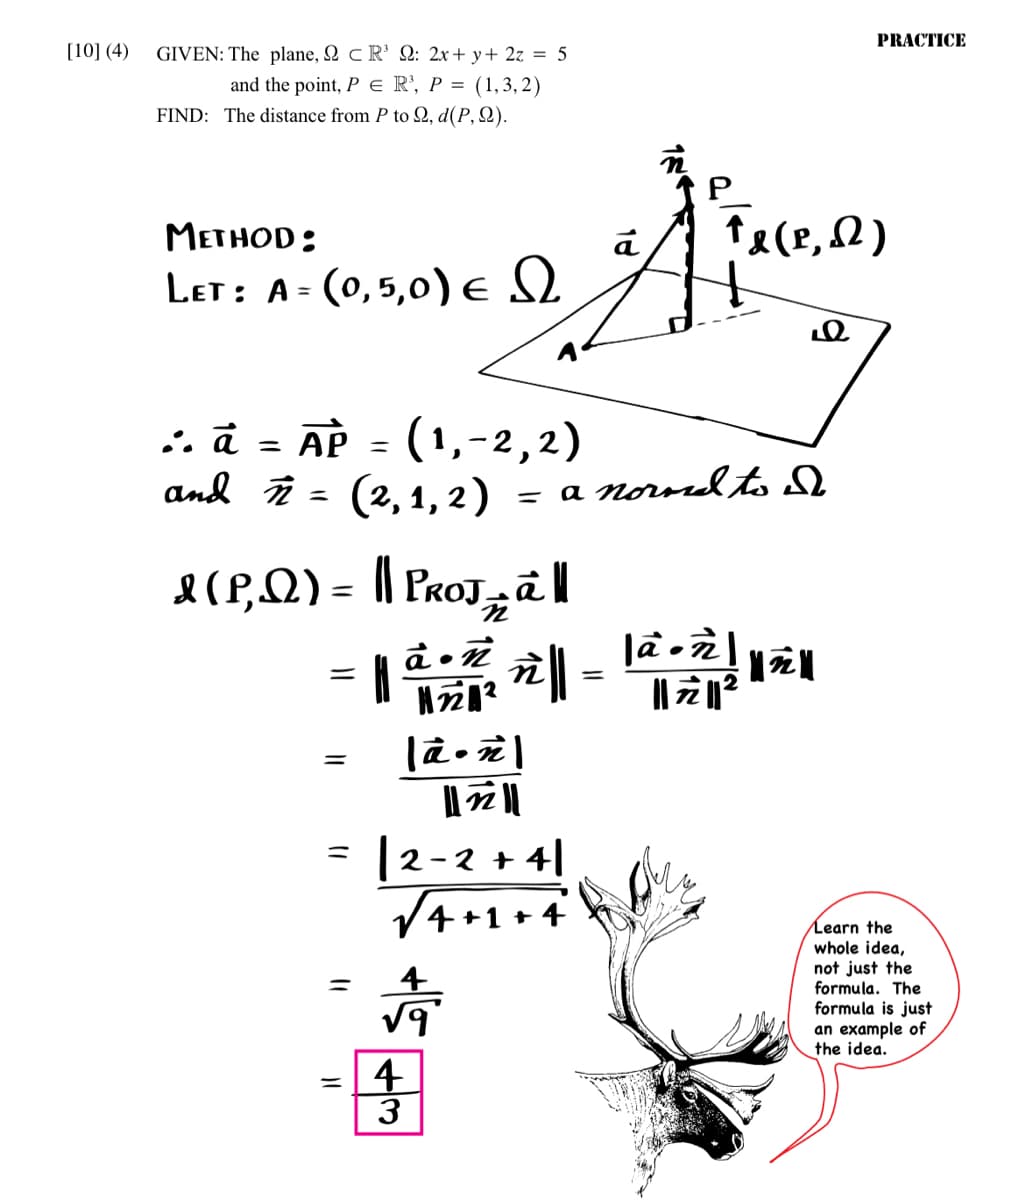 [10] (4)
GIVEN: The plane, QC R³ Q: 2x+y+ 2z = 5
and the point, P E R³, P = (1,3,2)
FIND: The distance from P to 2, d(P, Q).
METHOD:
LET: A = (0,5,0) E Q
.. a = AP = (1,-2,2)
and = (2,1,2)
=
& (P,Q) = || PROJ^||
= |ª-7² ^|| =
亢
=
=
P
↑& (PN)
a Aimar
मह
= a normed to d
[ã•ঈ\
||||
|2-2 +41
√4+1+4.
3
PRACTICE
|à = n |
||||²
Learn the
whole idea,
not just the
formula. The
formula is just
an example of
the idea.